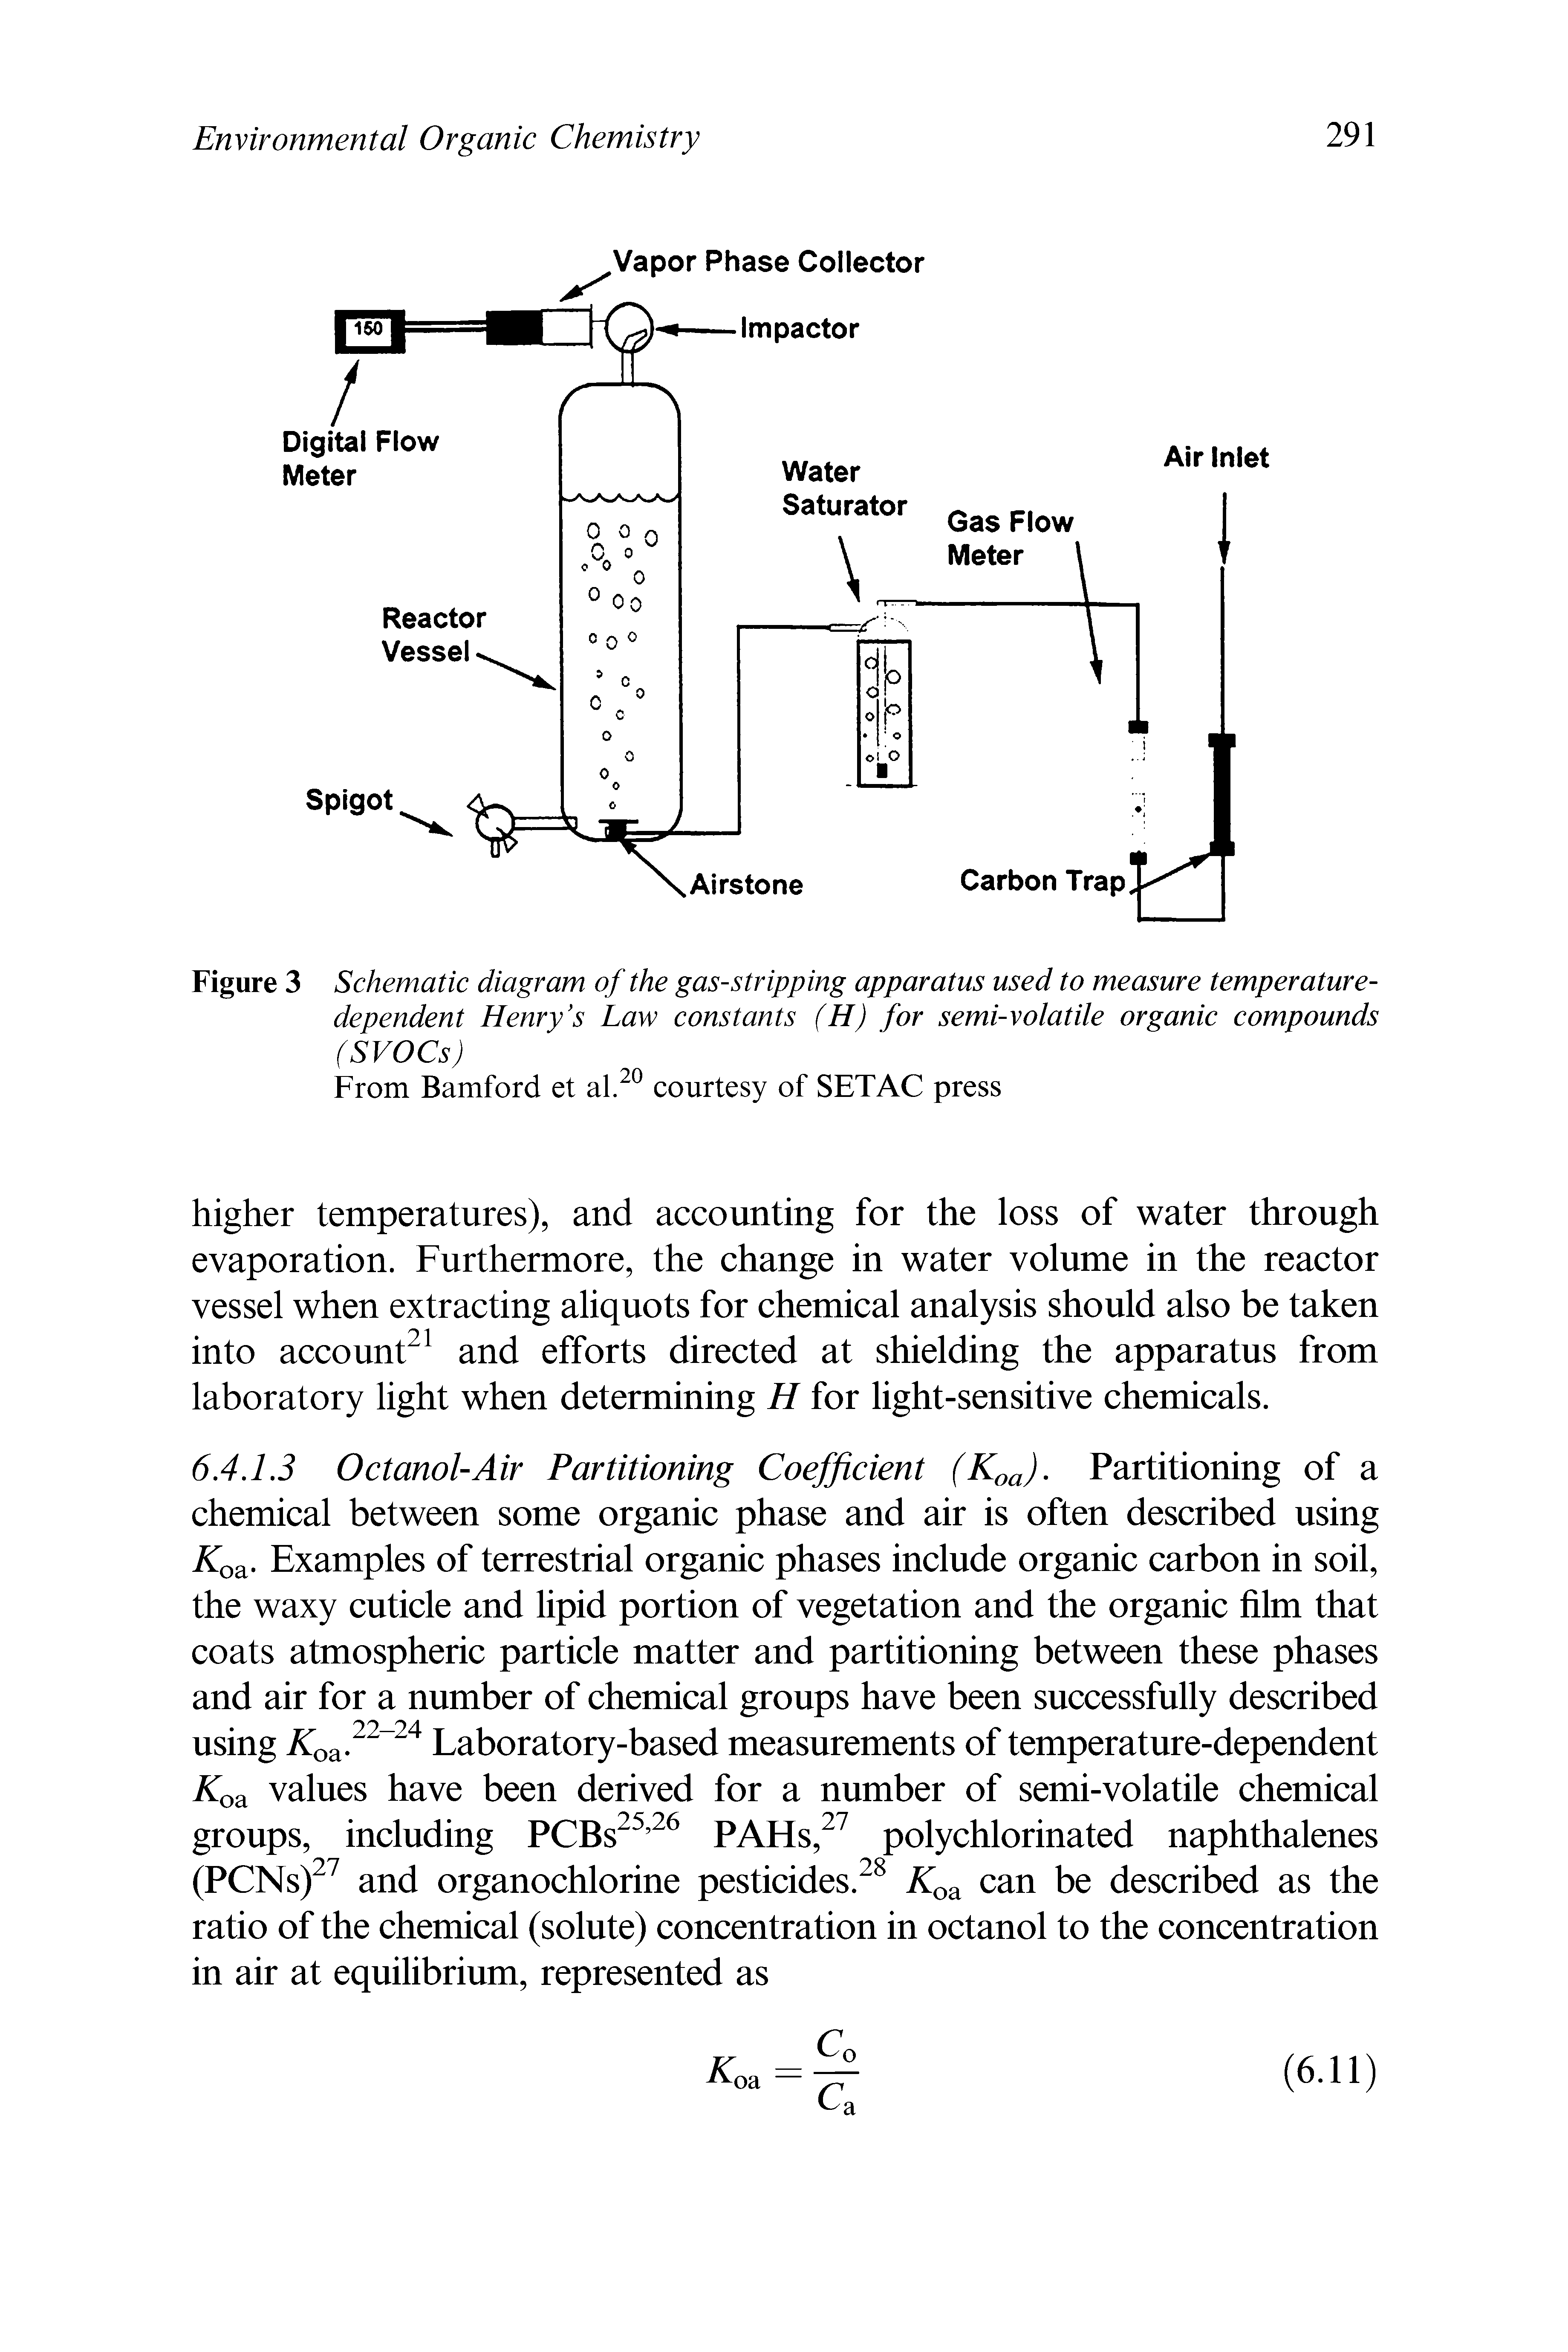 Figure 3 Schematic diagram of the gas-stripping apparatus used to measure temperature-dependent Henry s Law constants (H) for semi-volatile organic compounds (SVOCs)...